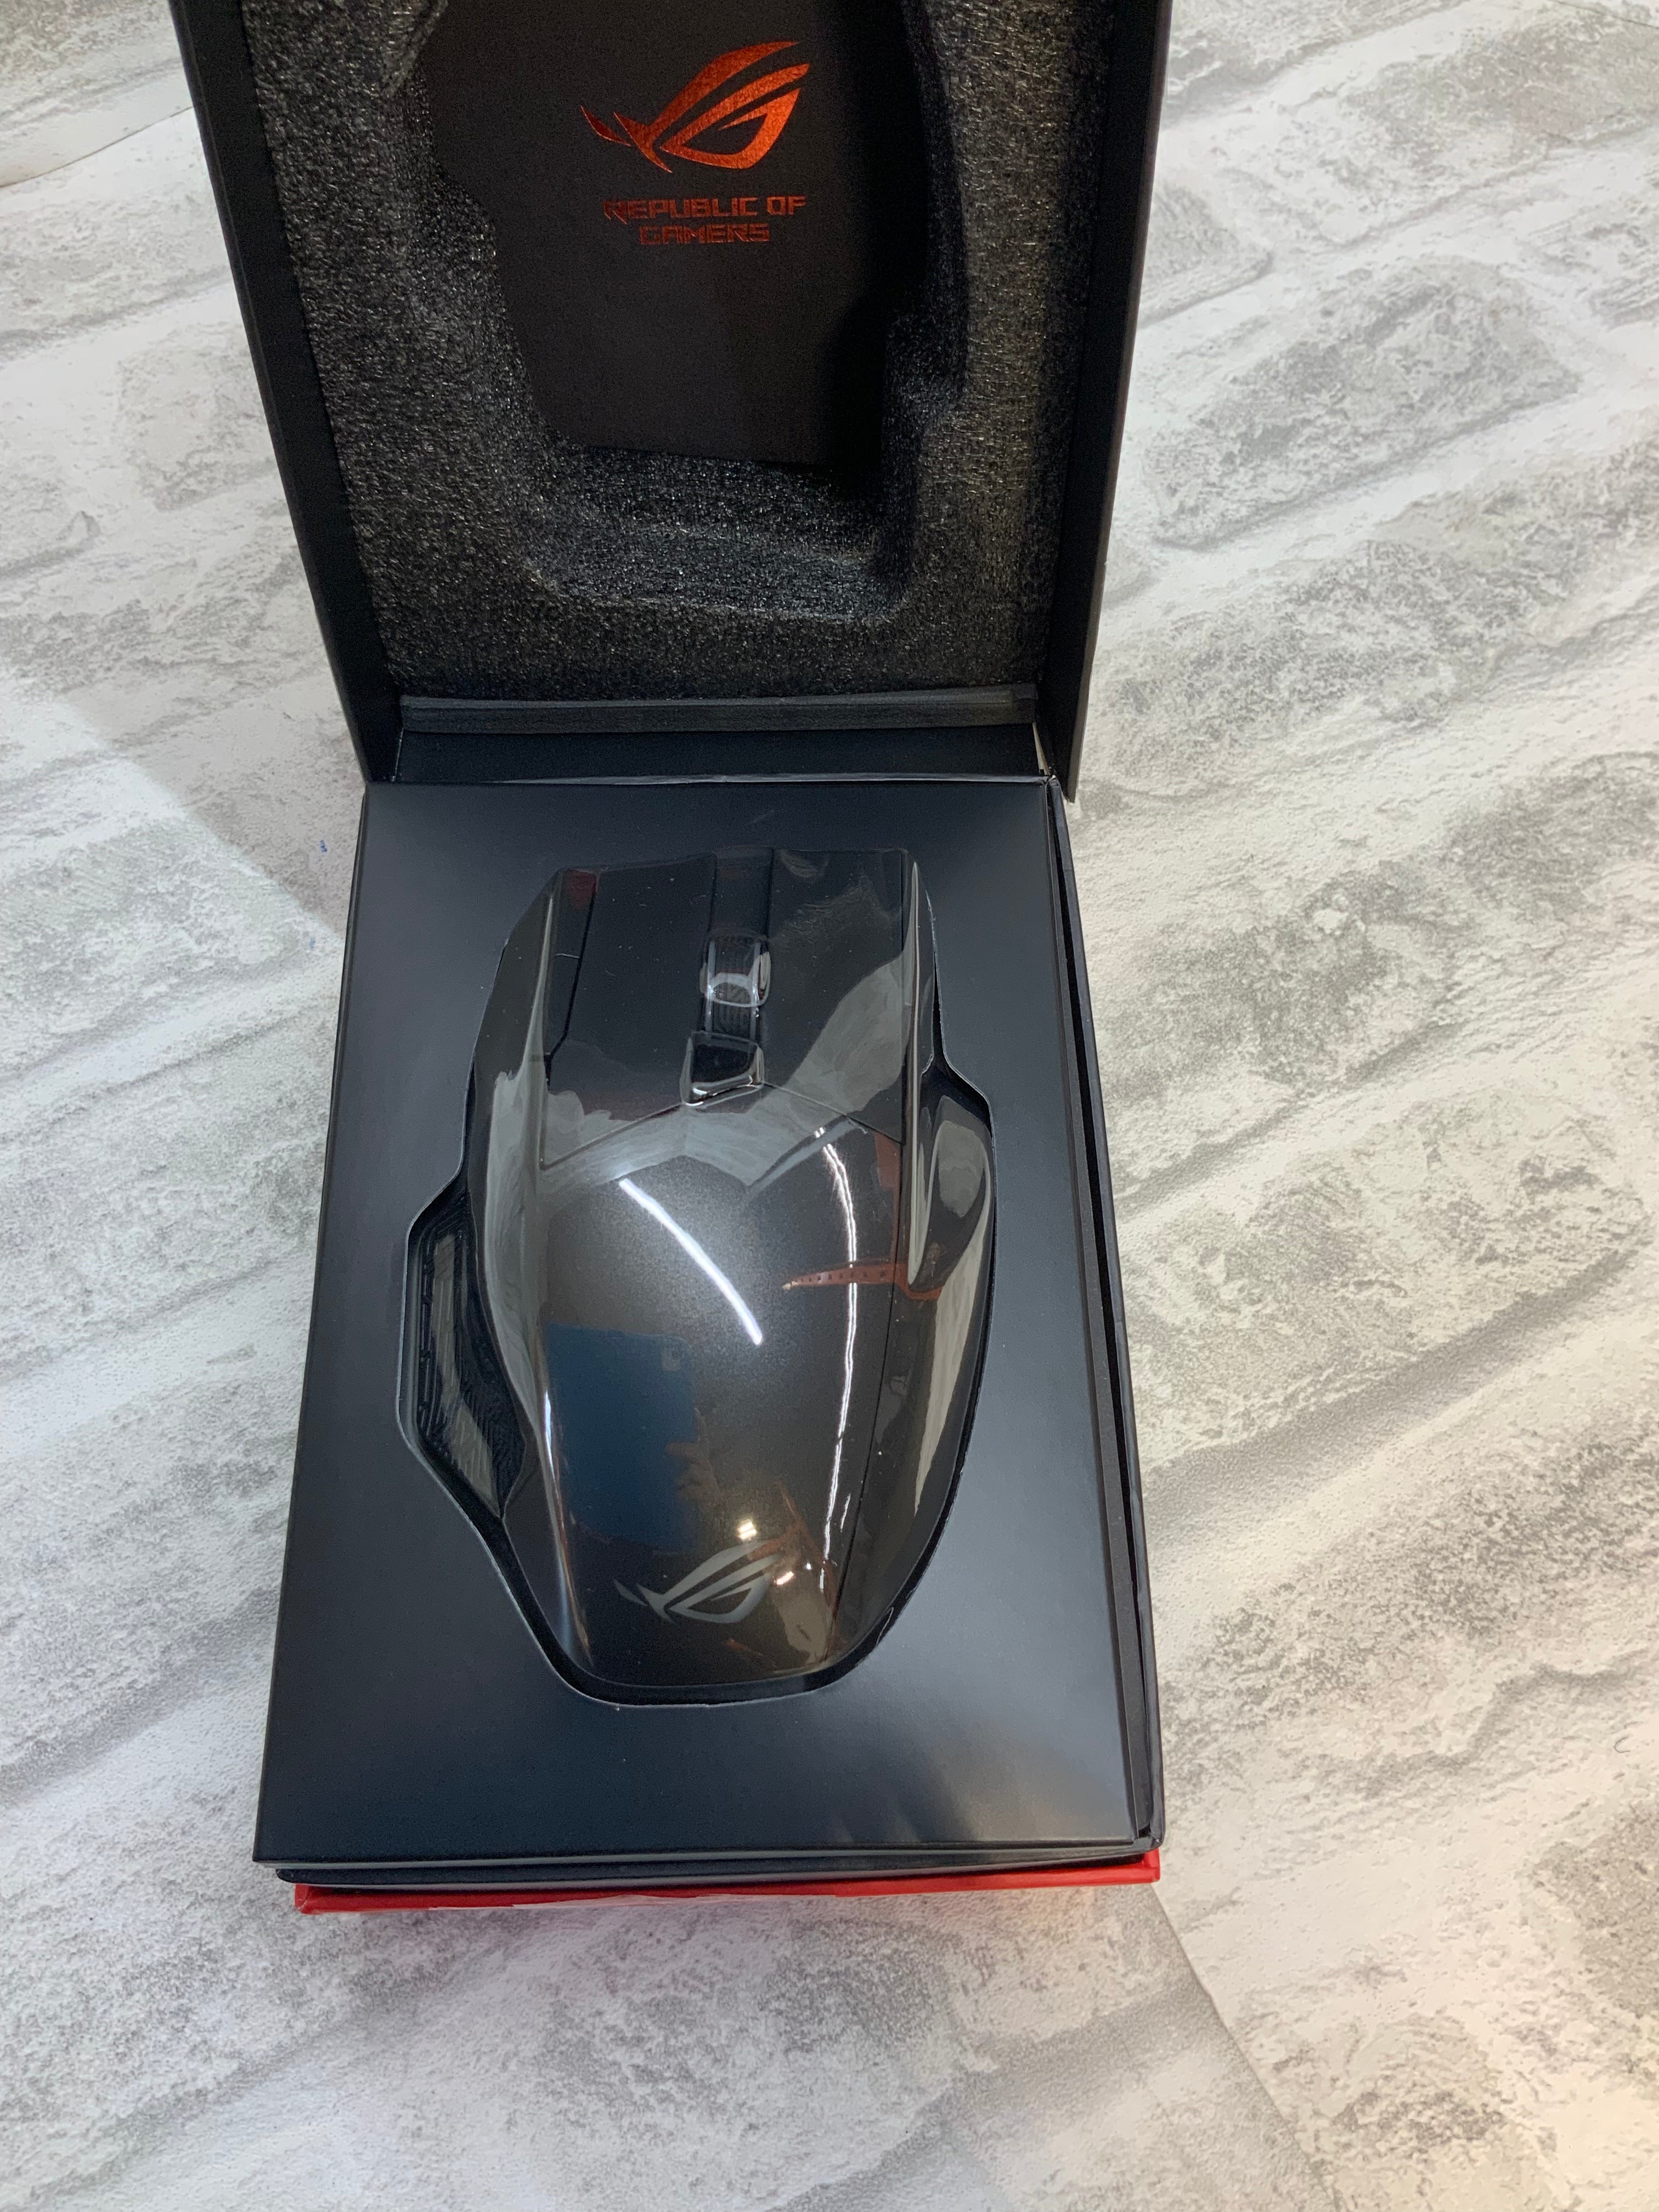 ASUS ROG Spatha X Wireless Gaming Mouse (7578130219246)